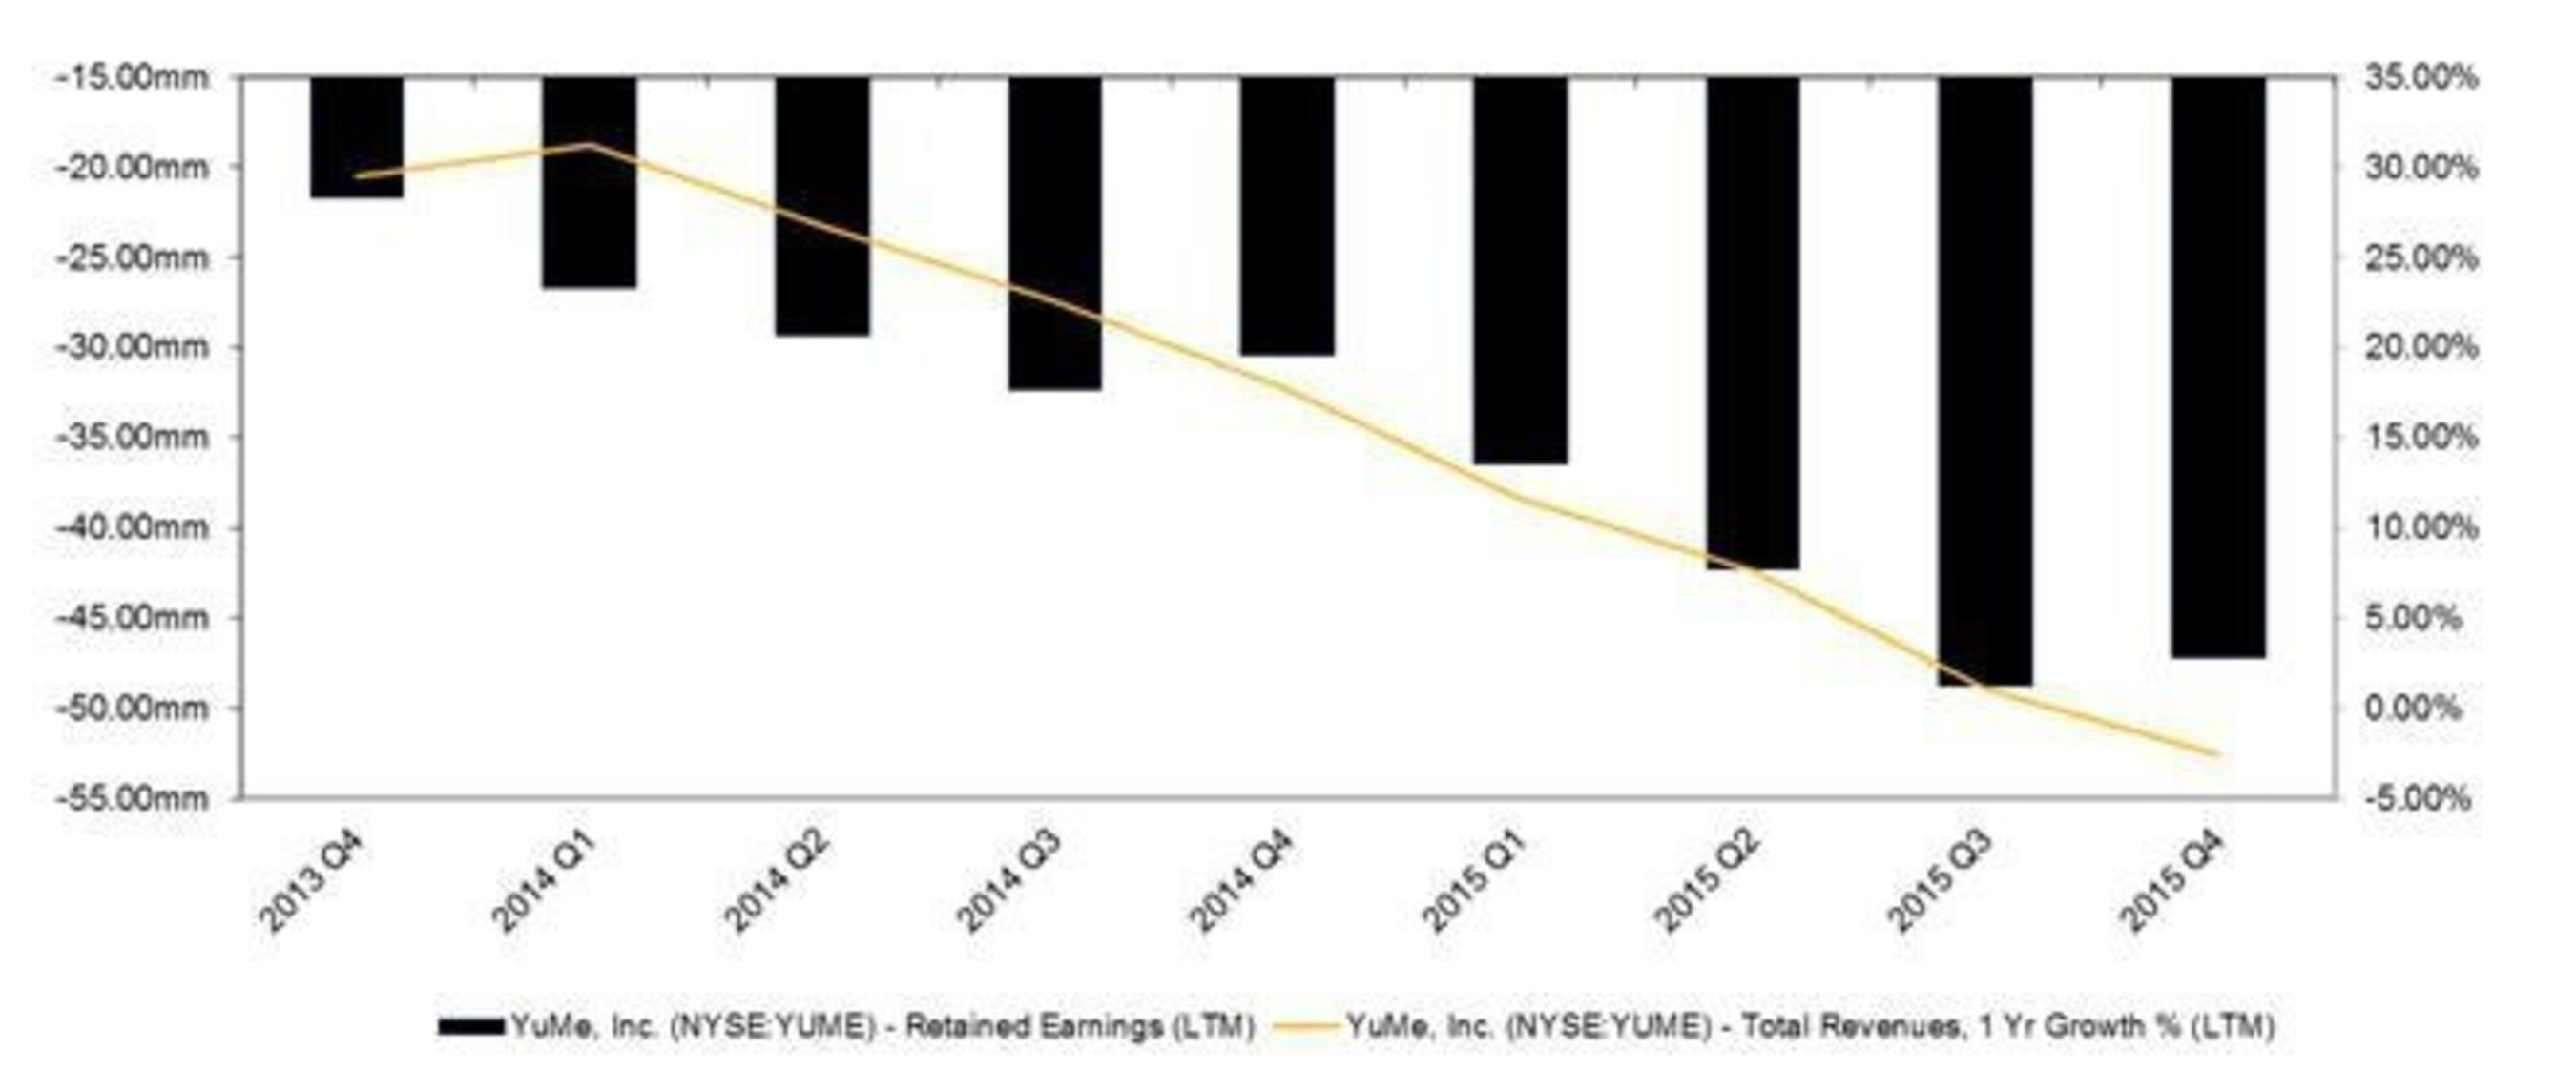 In Its First 30 Months, YuMe's Operational Performance Has Catastrophically Deteriorated.